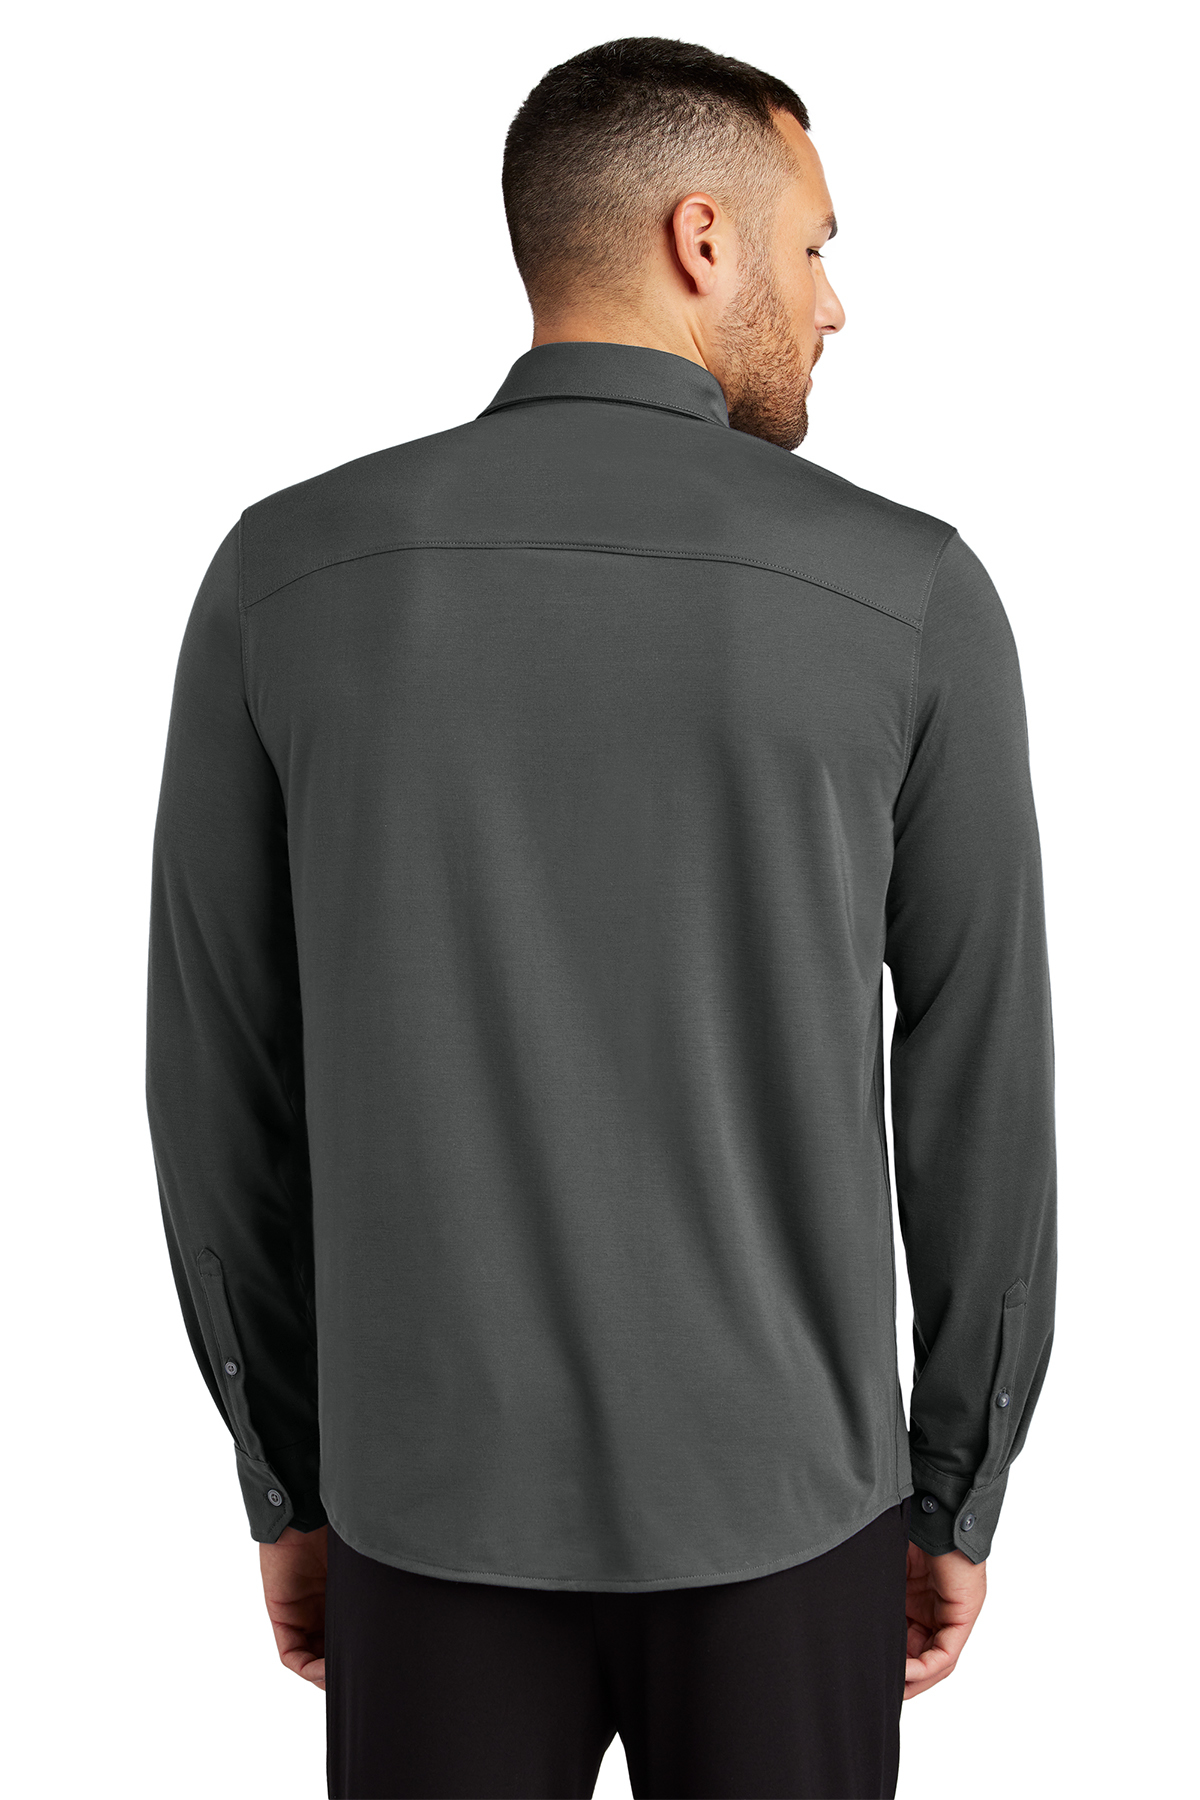 Mercer+Mettle Stretch Jersey Long Sleeve Shirt, Product